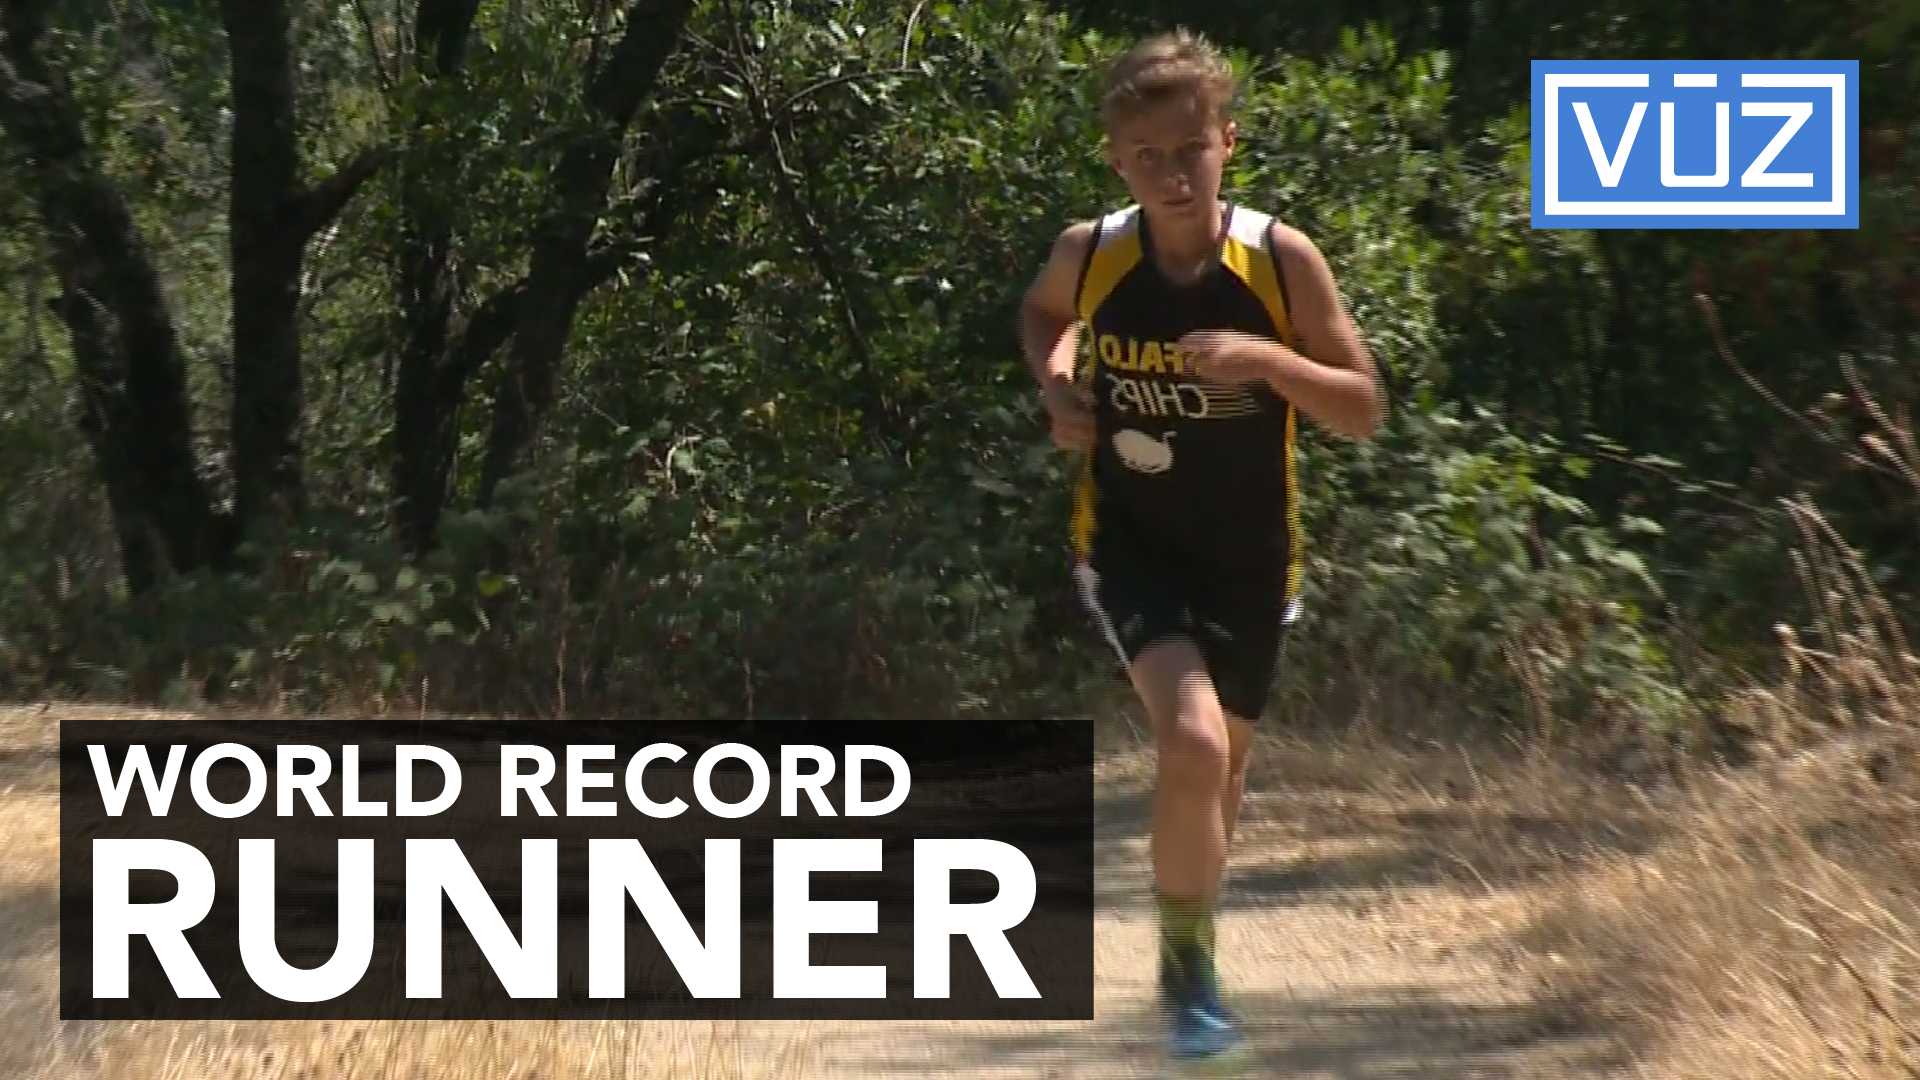 A 10-year-old broke a world record in long distance running